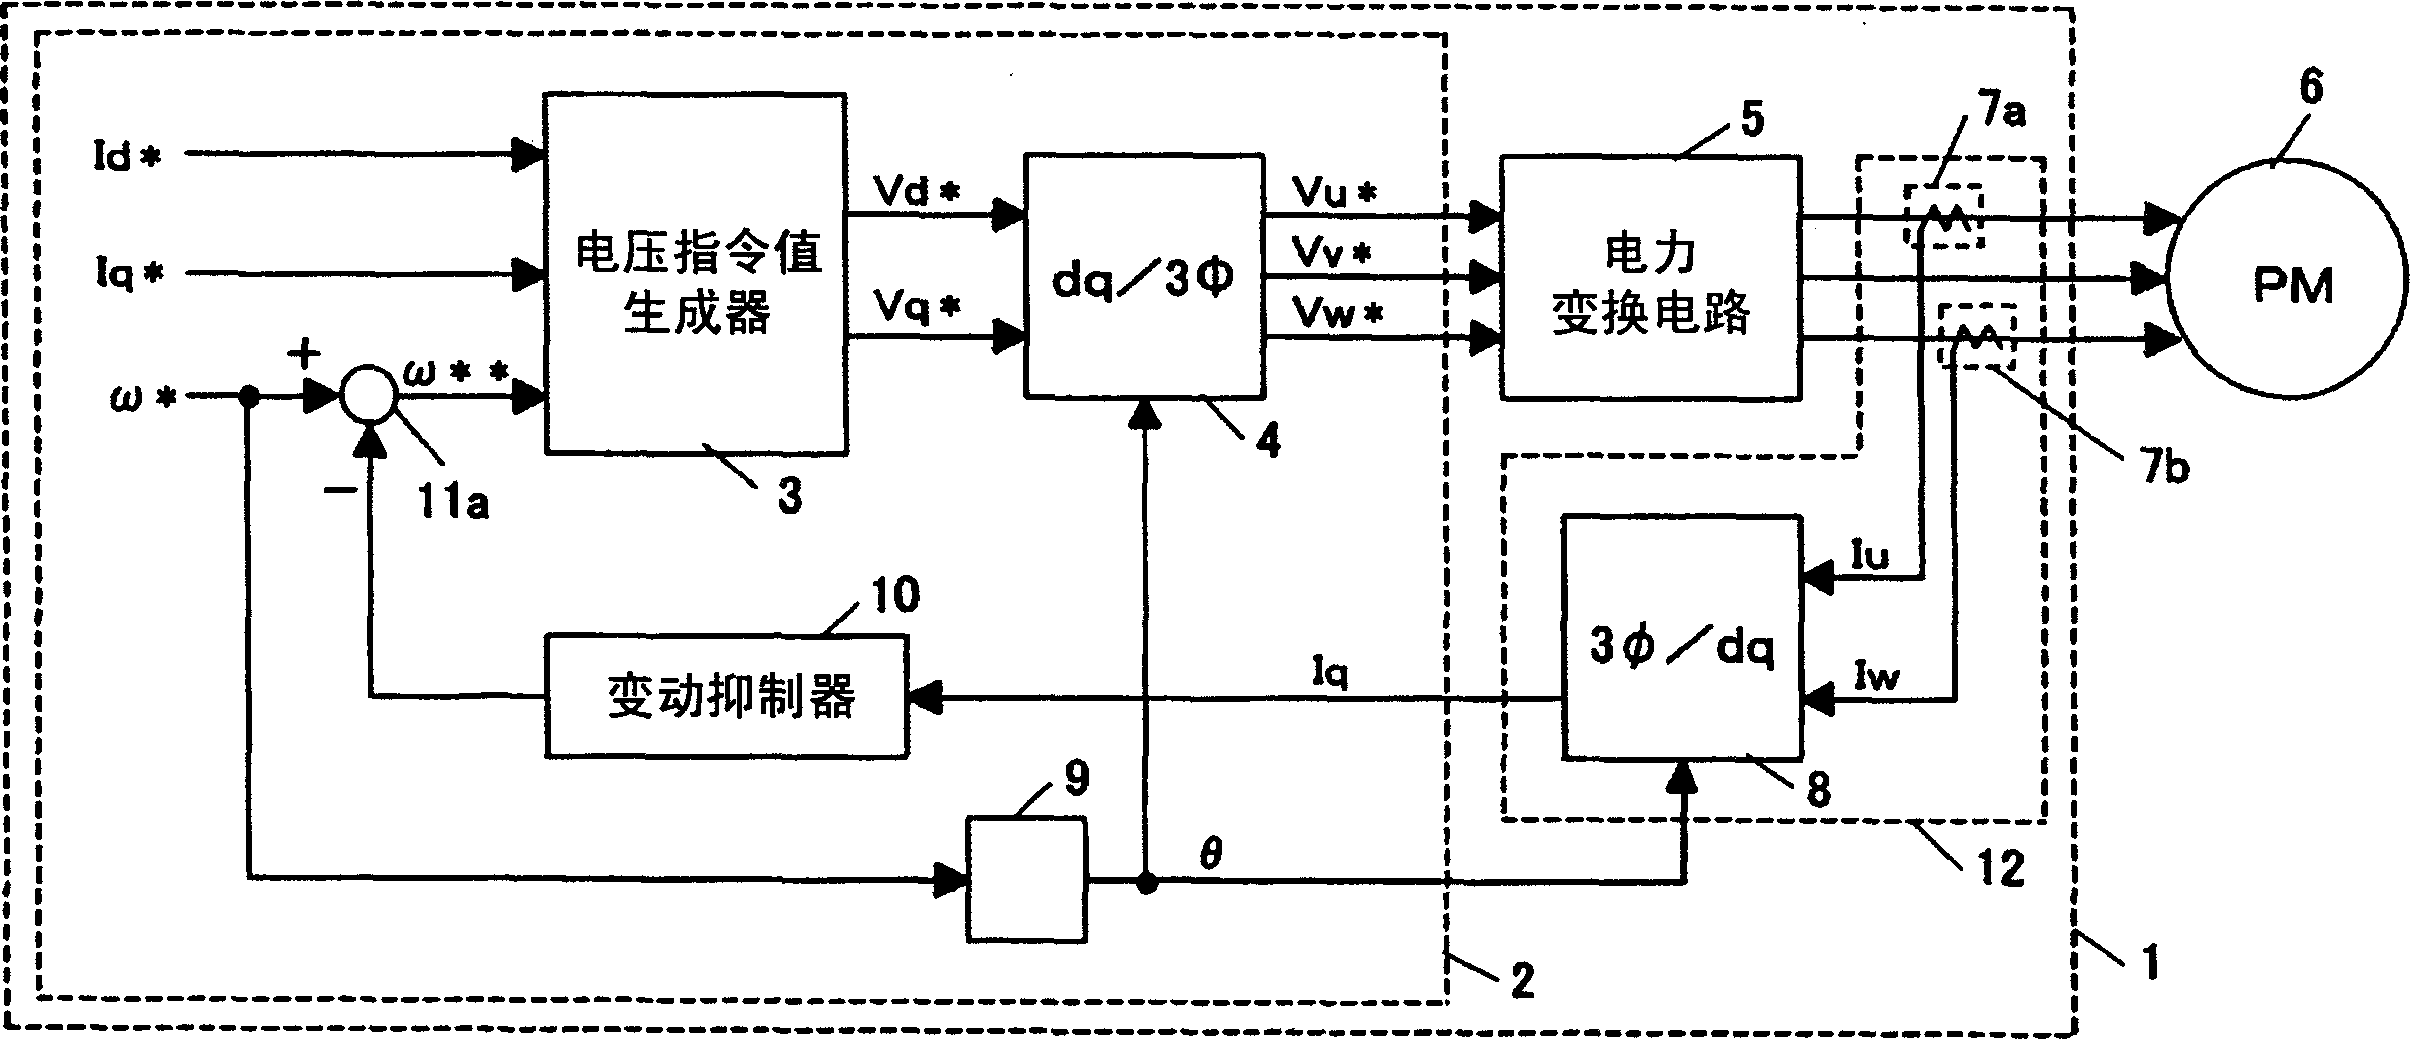 Permanent magnetism synchrounous electromotor control device